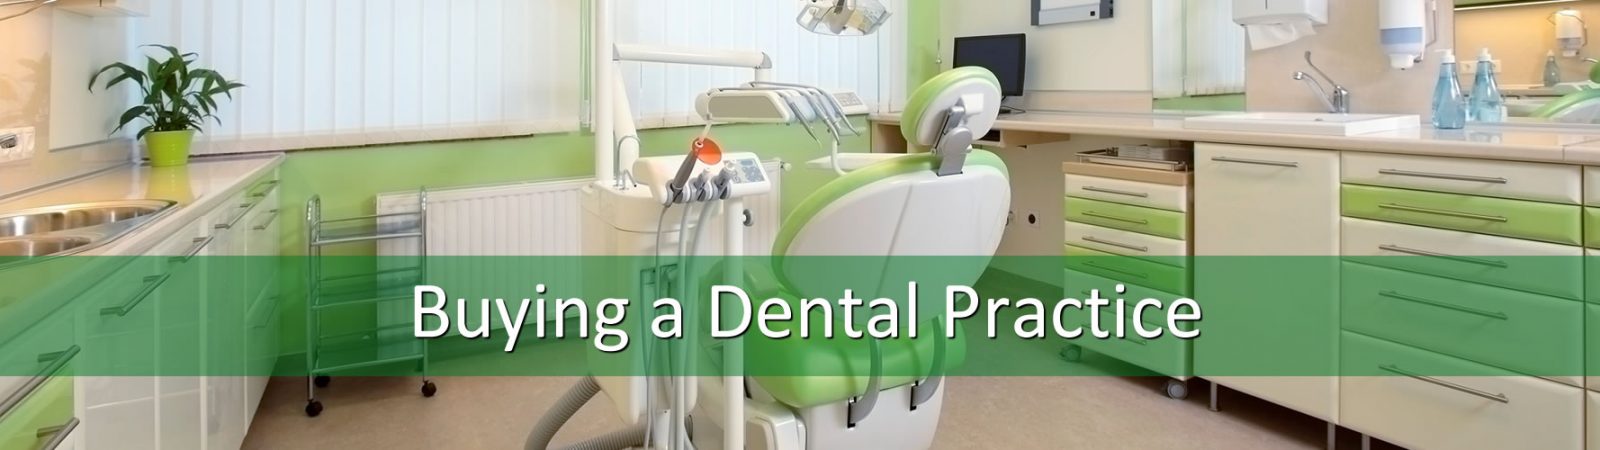 Buying a Dental Practice in CT and NY | How to Buy a Dental Practice